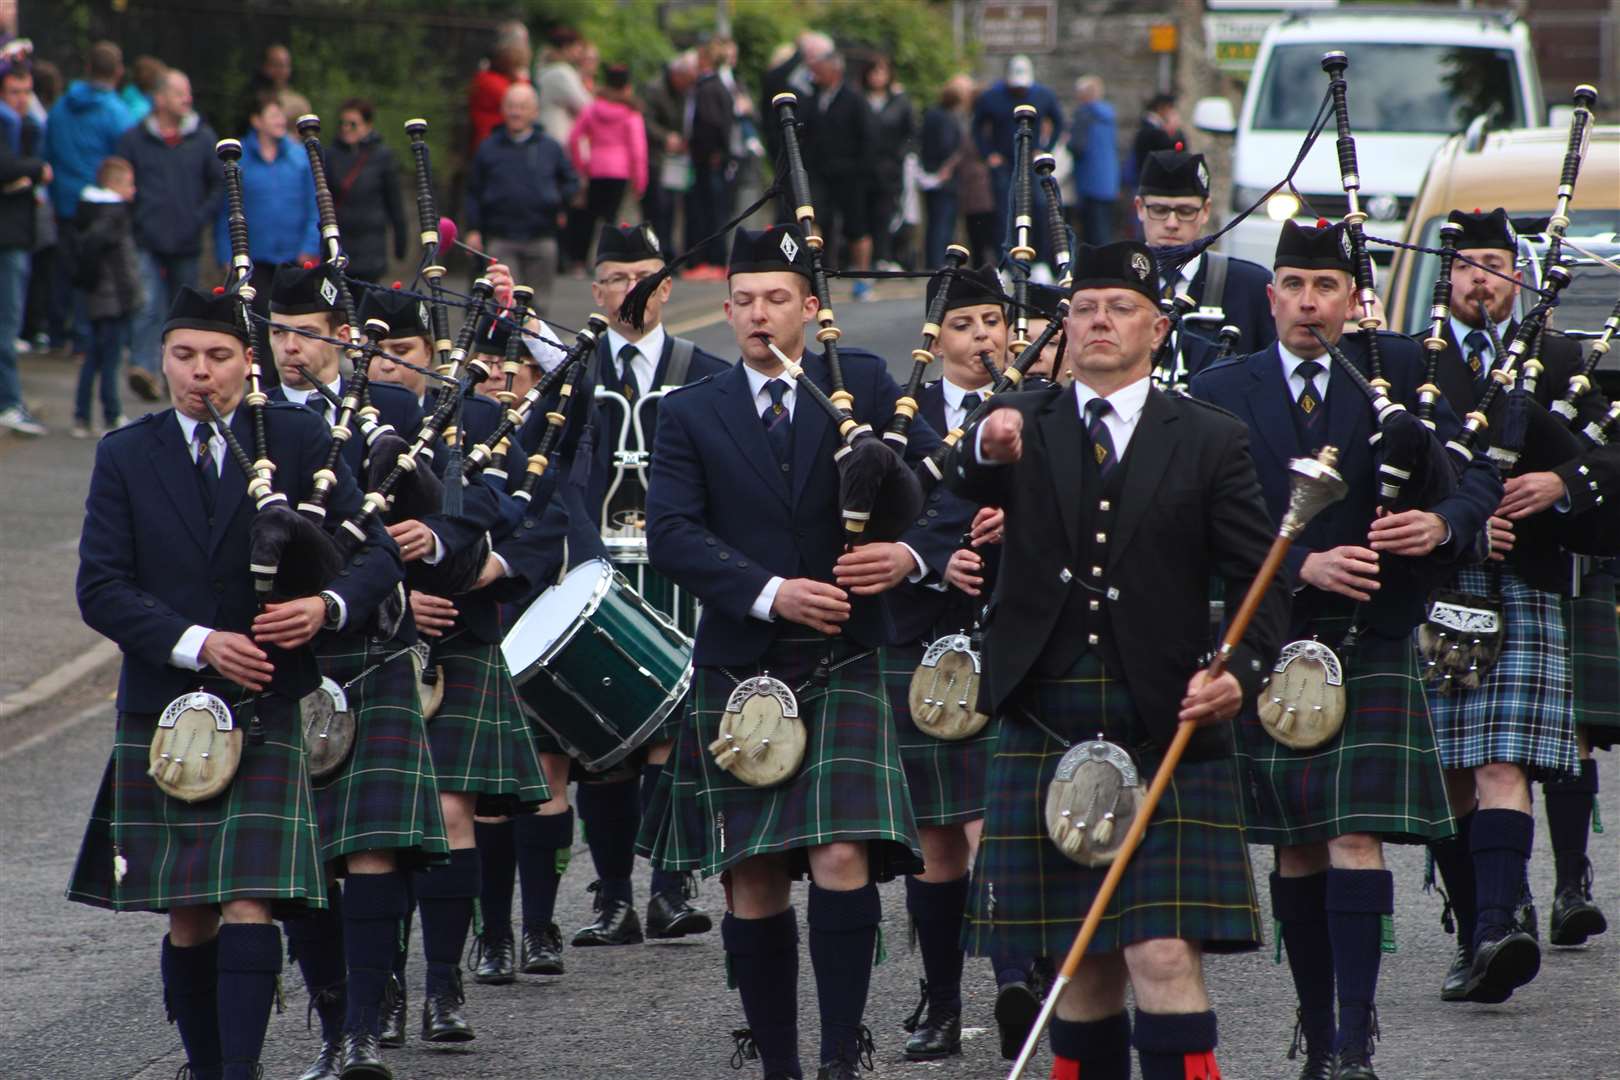 Thurso Pipe Band marching down Cliff Road for the parade. Alan Hendry